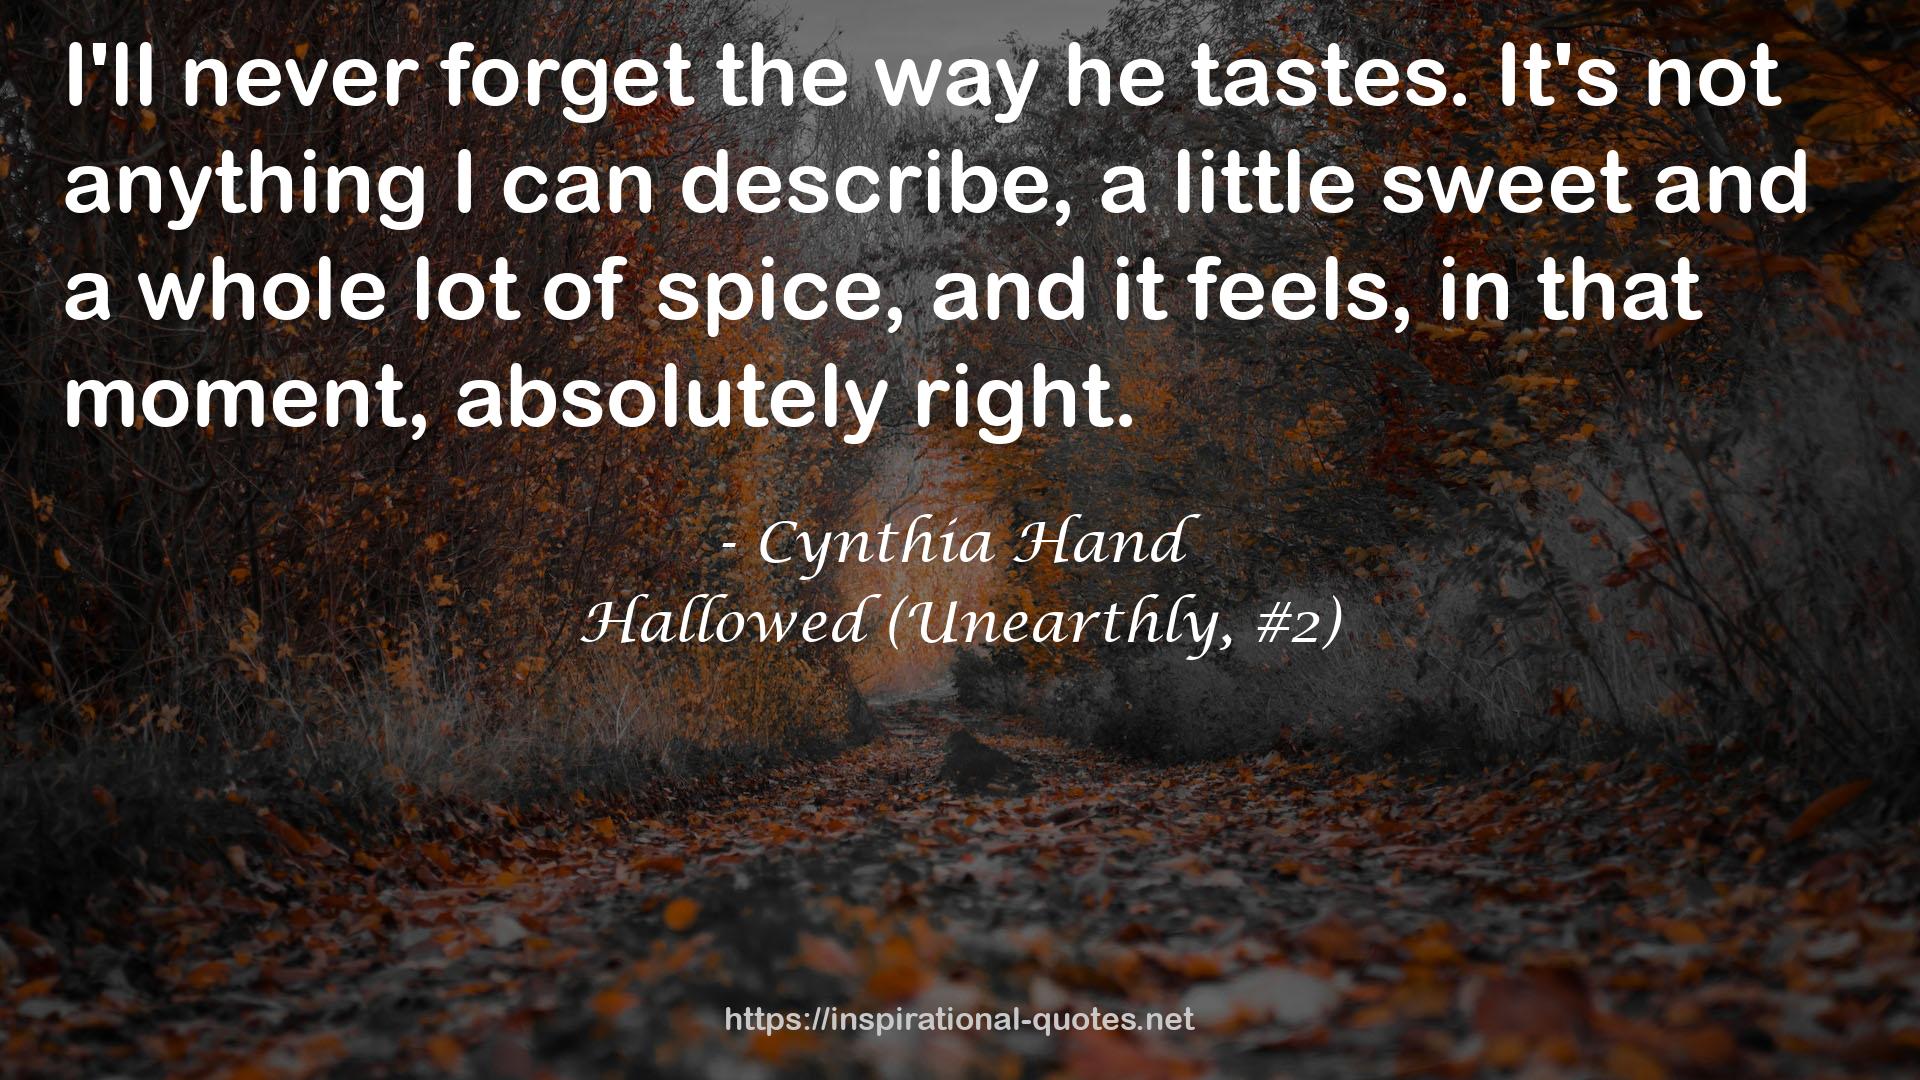 Hallowed (Unearthly, #2) QUOTES